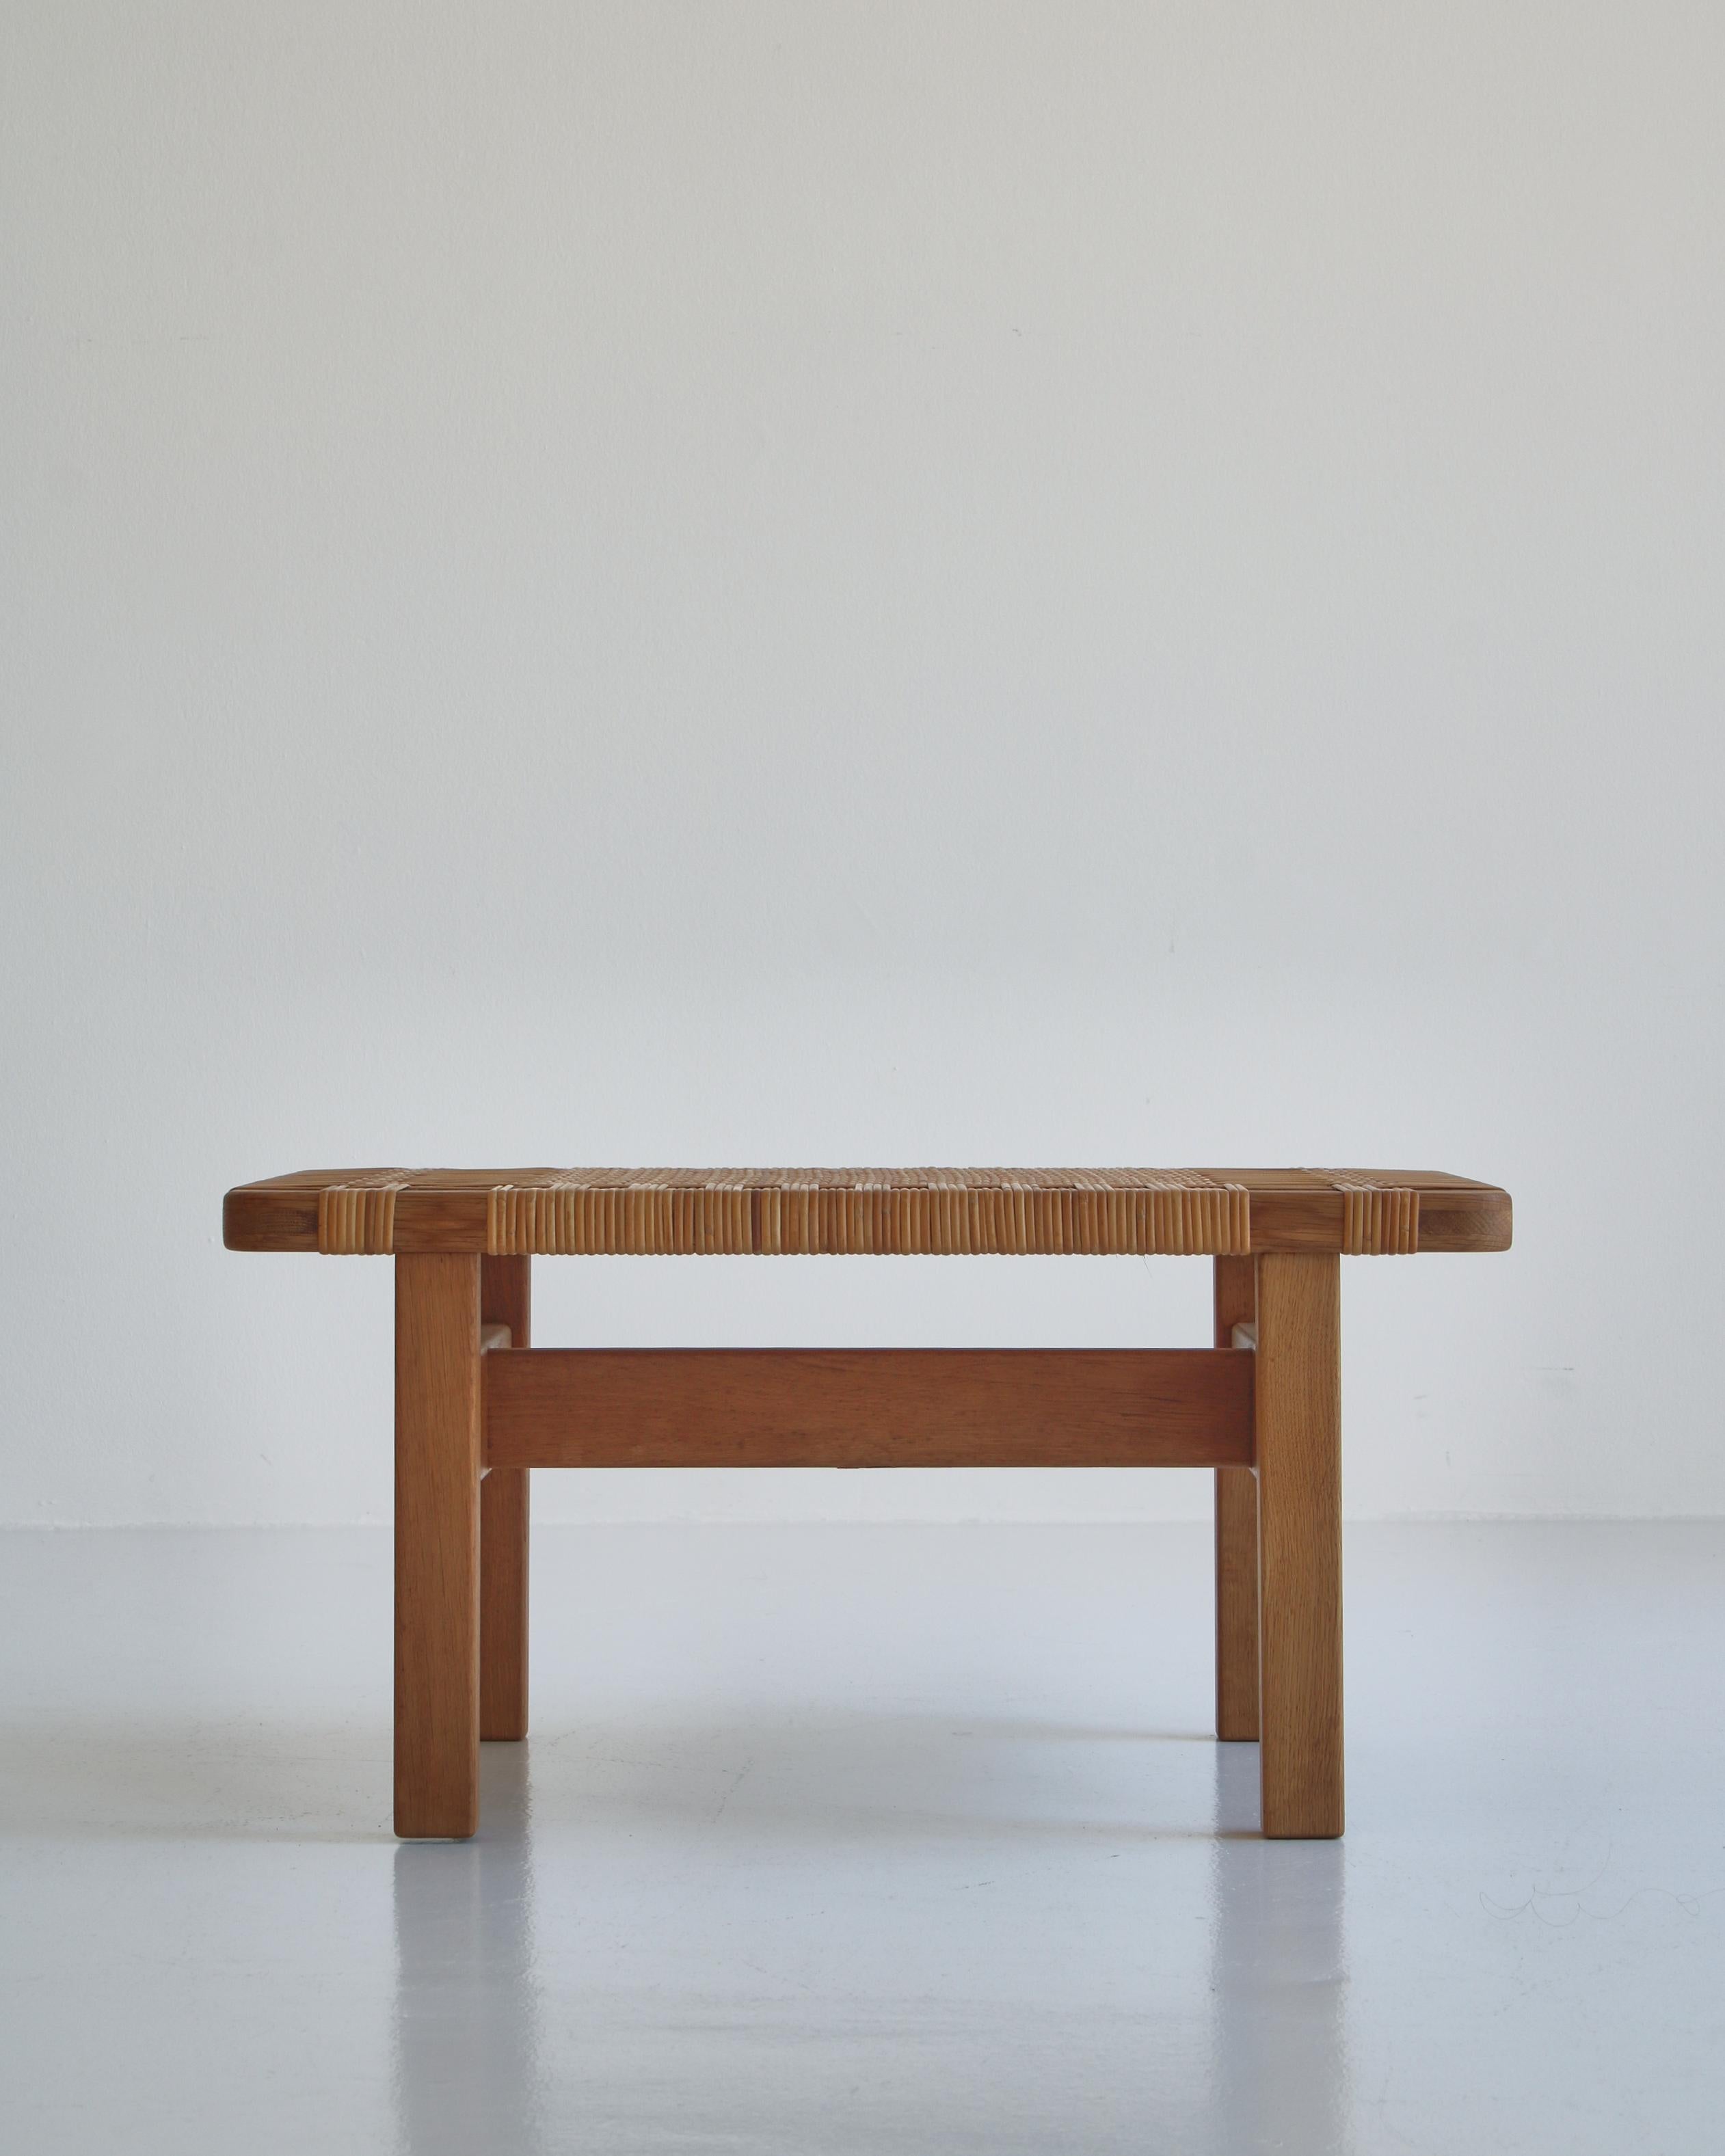 Hand-Woven Borge Mogensen Side Table/Bench in Oak and Rattan Cane, 1950s, Denmark For Sale